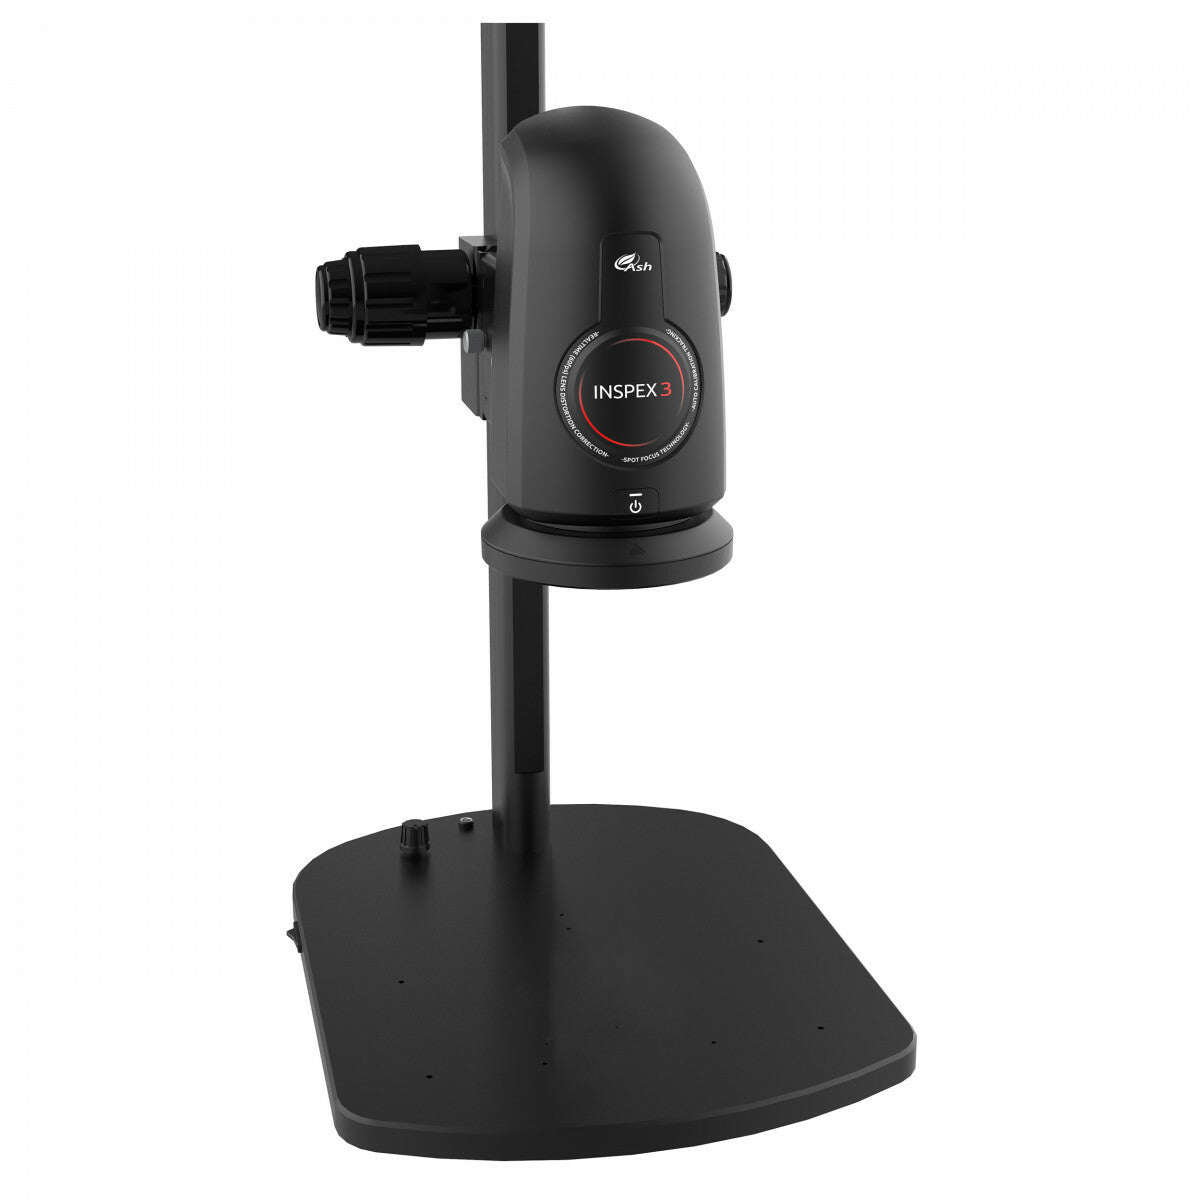 Ash Vision Inspex 3 Digital Microscope System On Track Stand